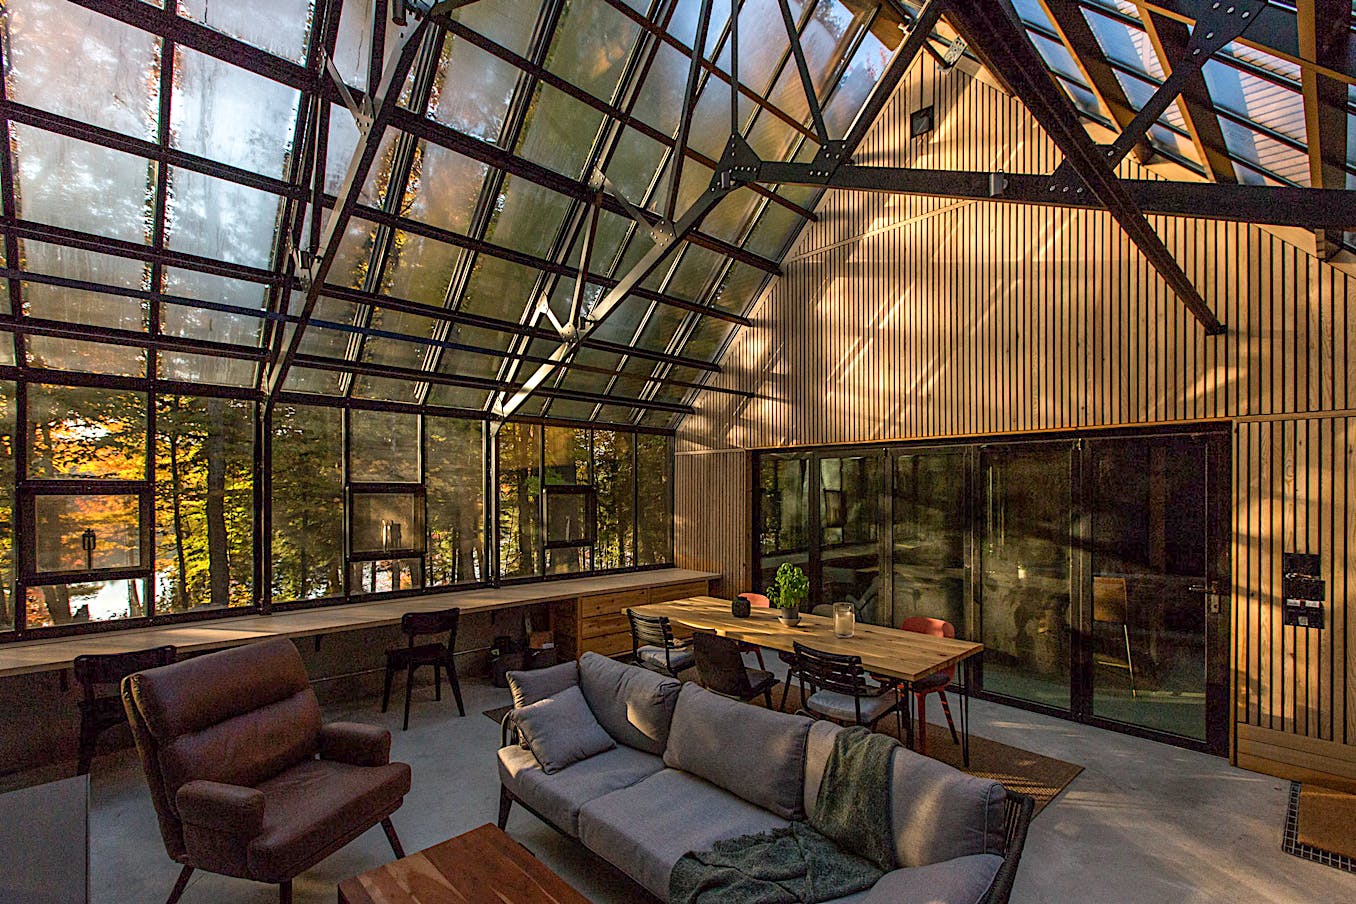 A greenhouse cottage with glass walls that offer a stunning view of the outdoors